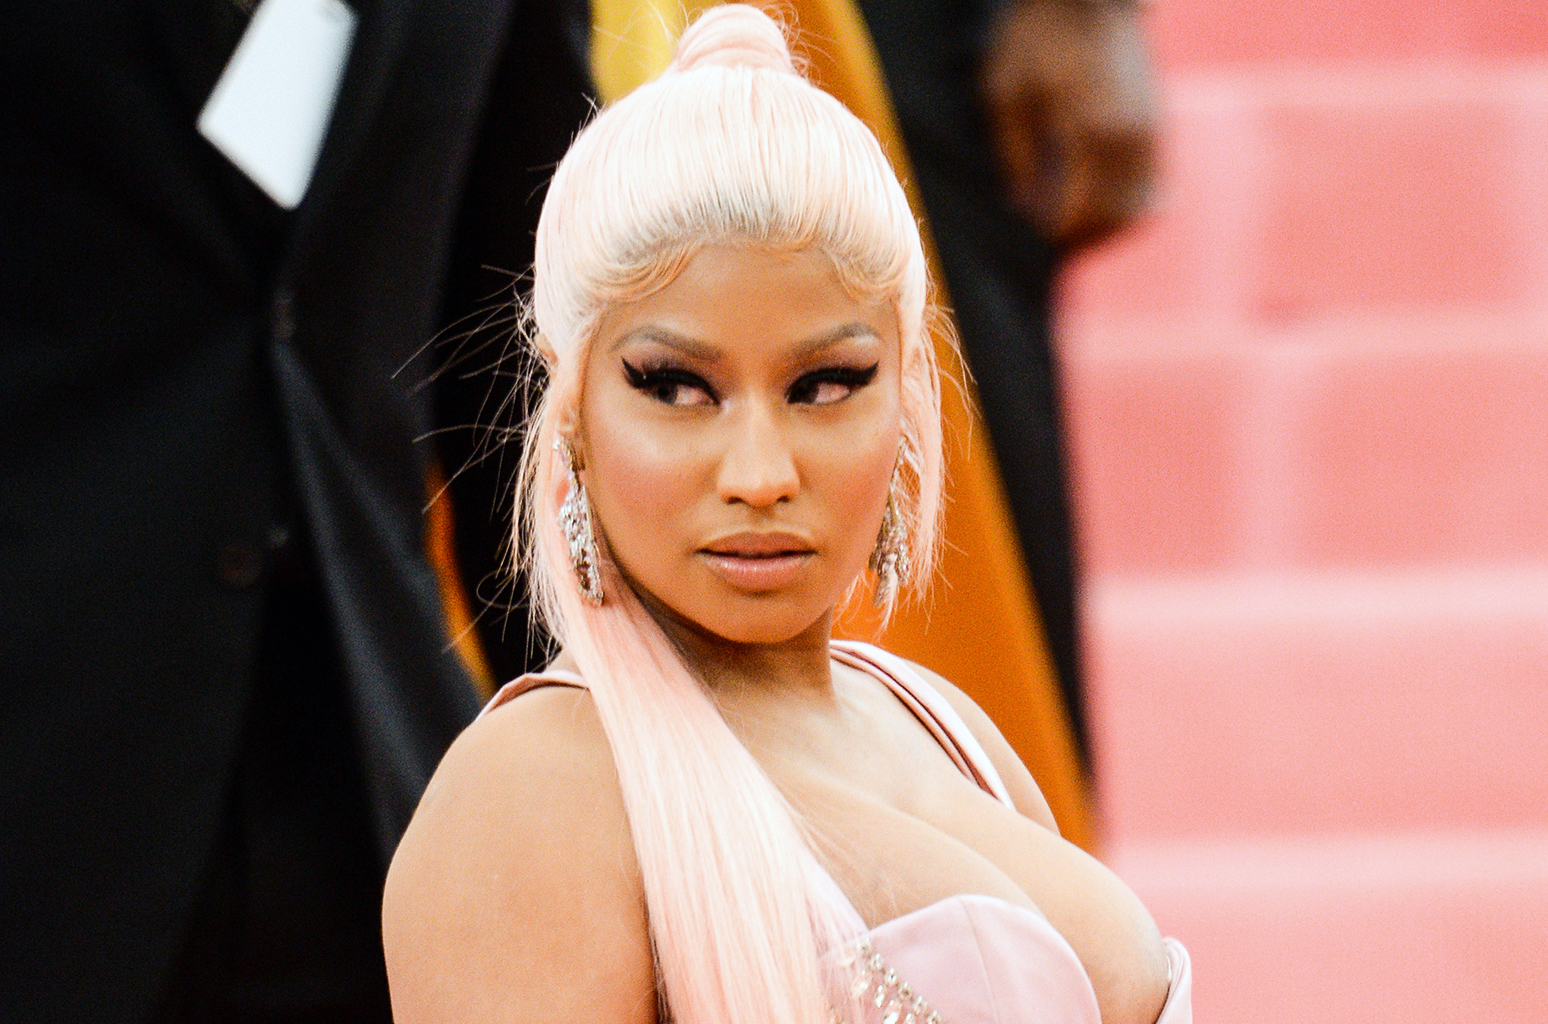 A Nicki Minaj Wax Figure in Germany Leaves Fans With Some… Questions